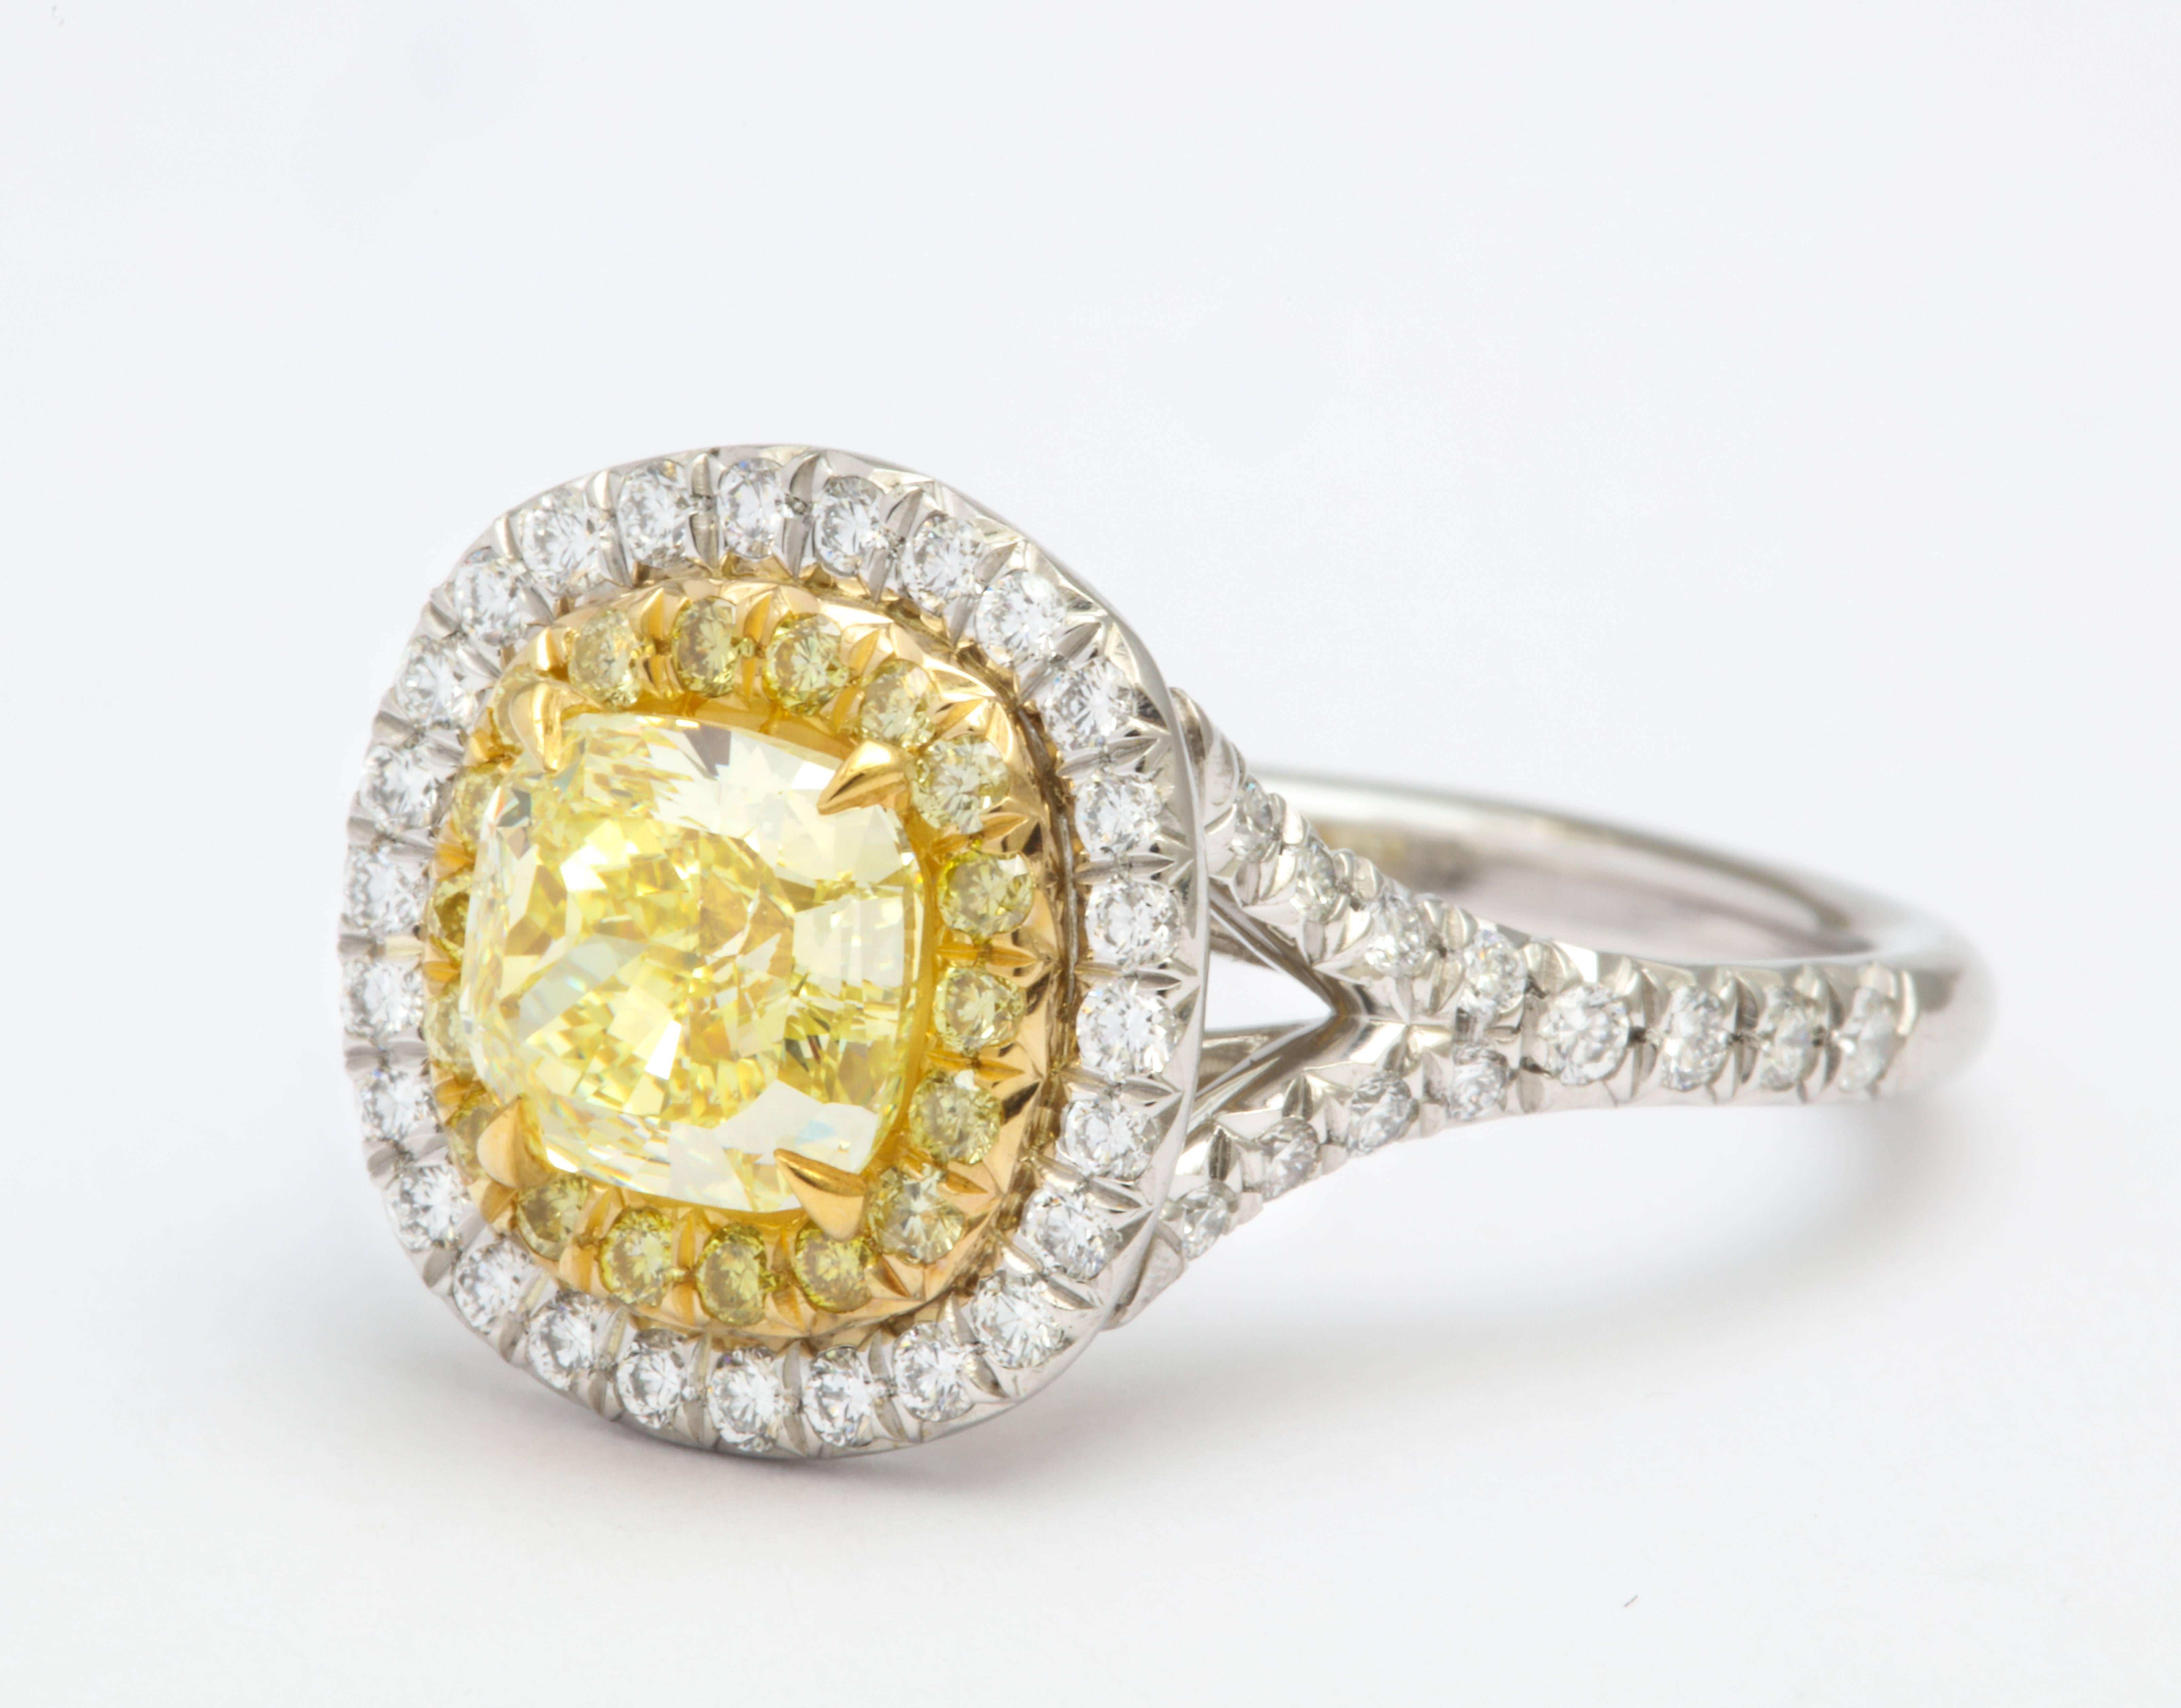 Fancy color engagement rings are on trend! Stand out with this beautiful, natural colored diamond ring featuring a 1.32 carat FANCY INTENSE yellow - VS1 GIA Certified diamond center stone, set in platinum and 18 karat yellow gold.  (GIA report